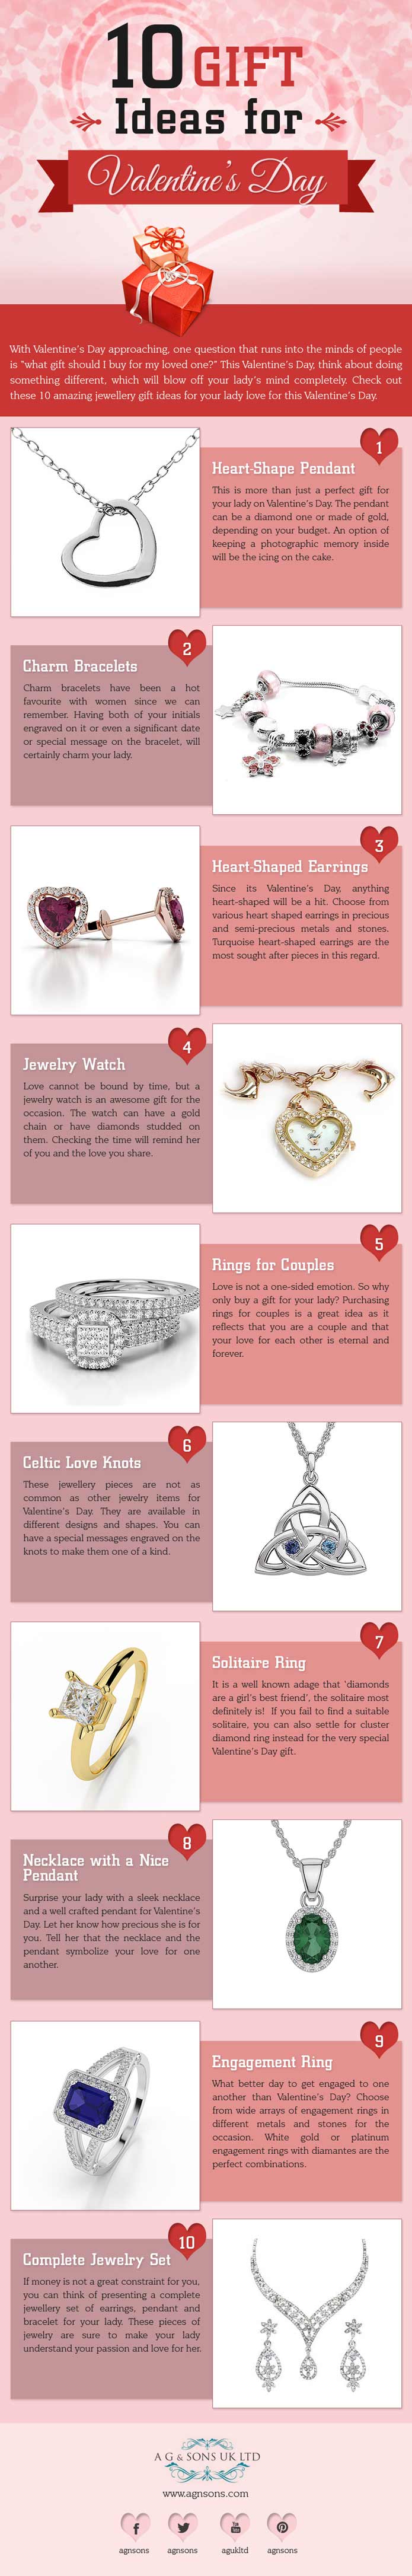 Gift-Ideas-for-Valentine's-Day